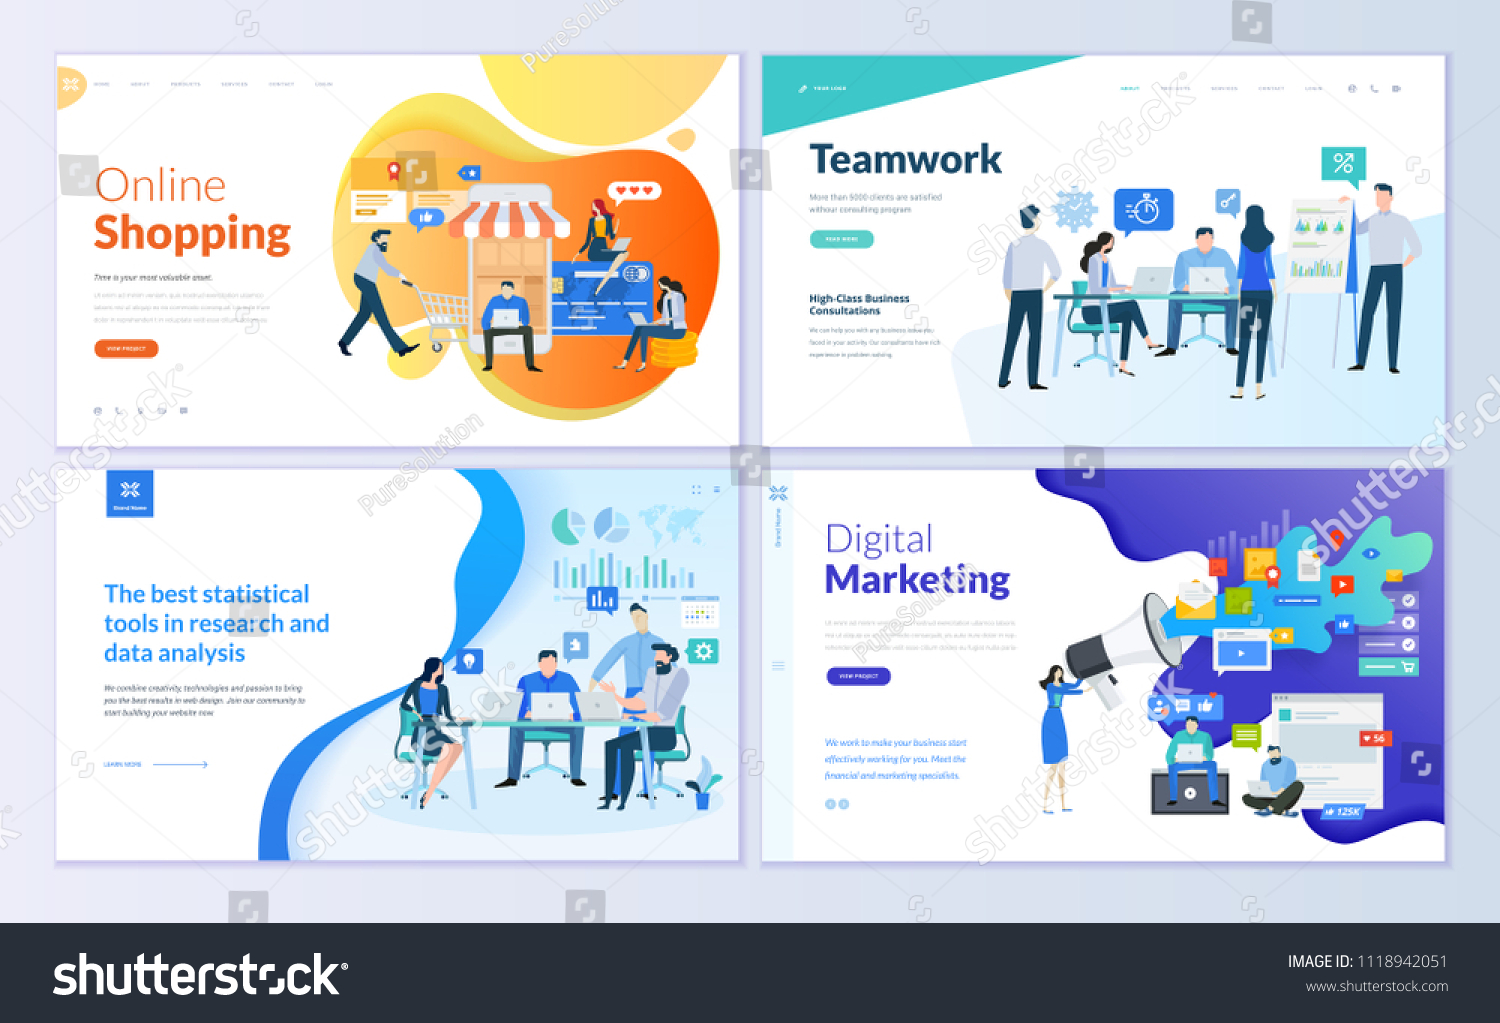 Set of web page design templates for online shopping, digital marketing, teamwork, business strategy and analytics. Modern vector illustration concepts for website and mobile website development.  #1118942051